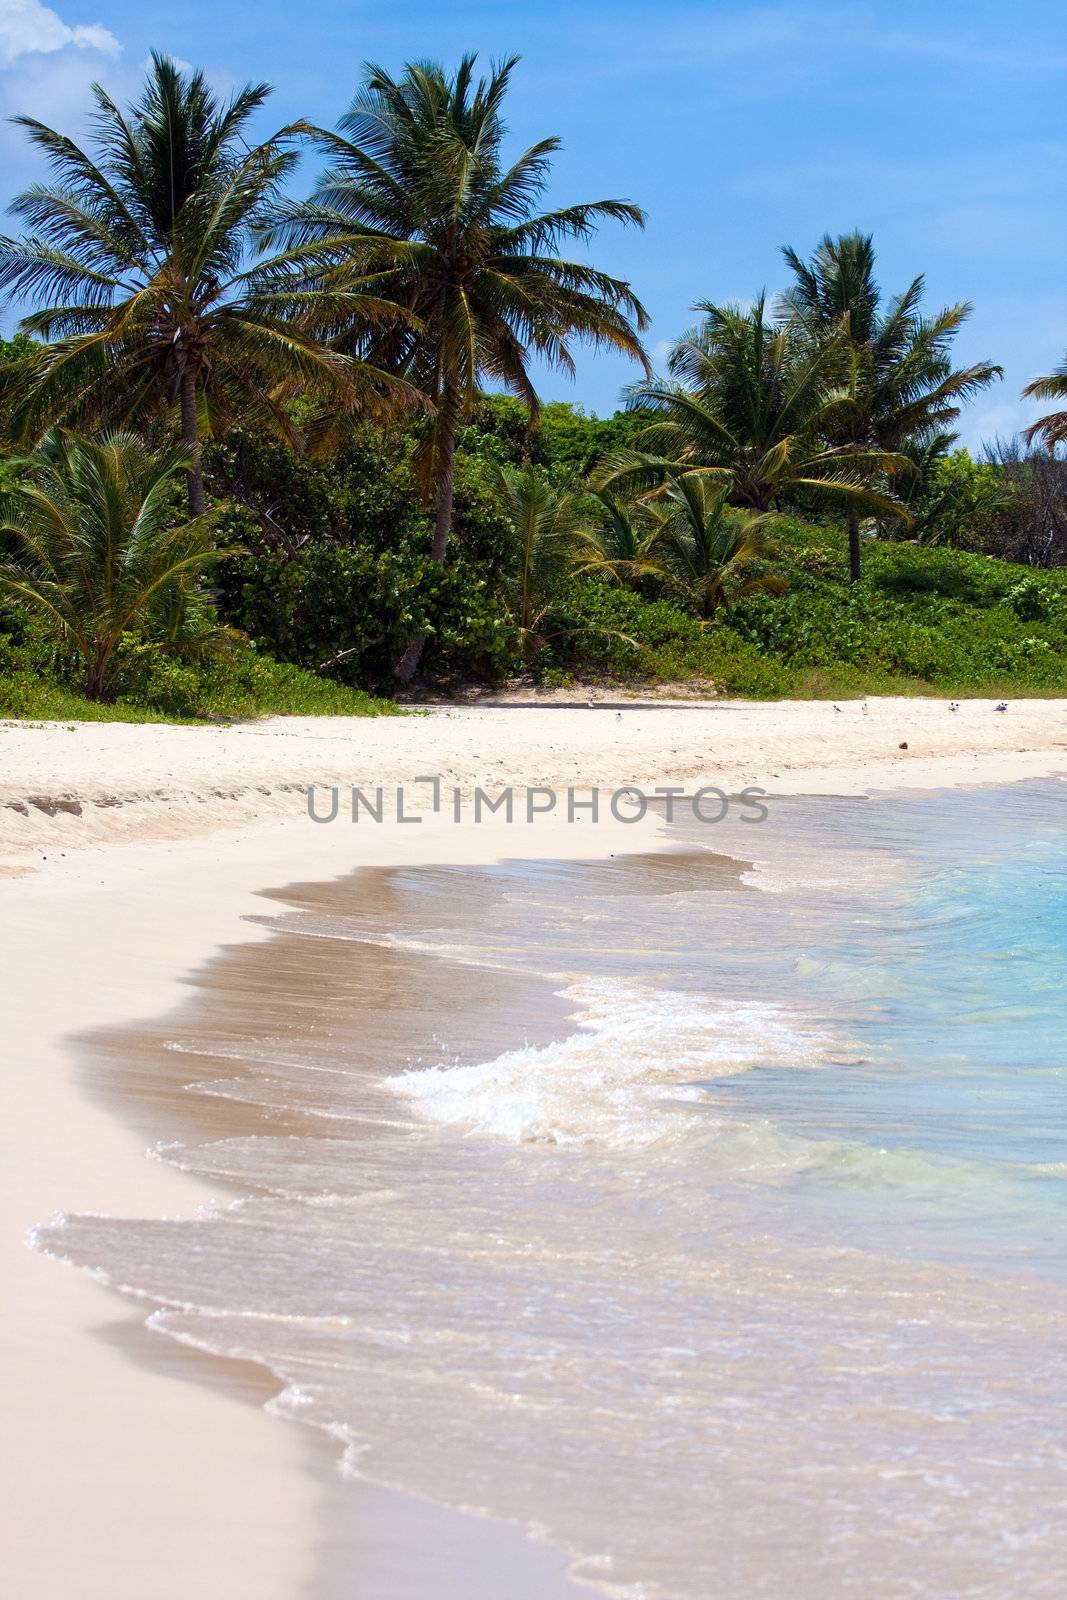 The breathtaking Flamenco beach on the Puerto Rican island of Culebra with palm trees and white sands.